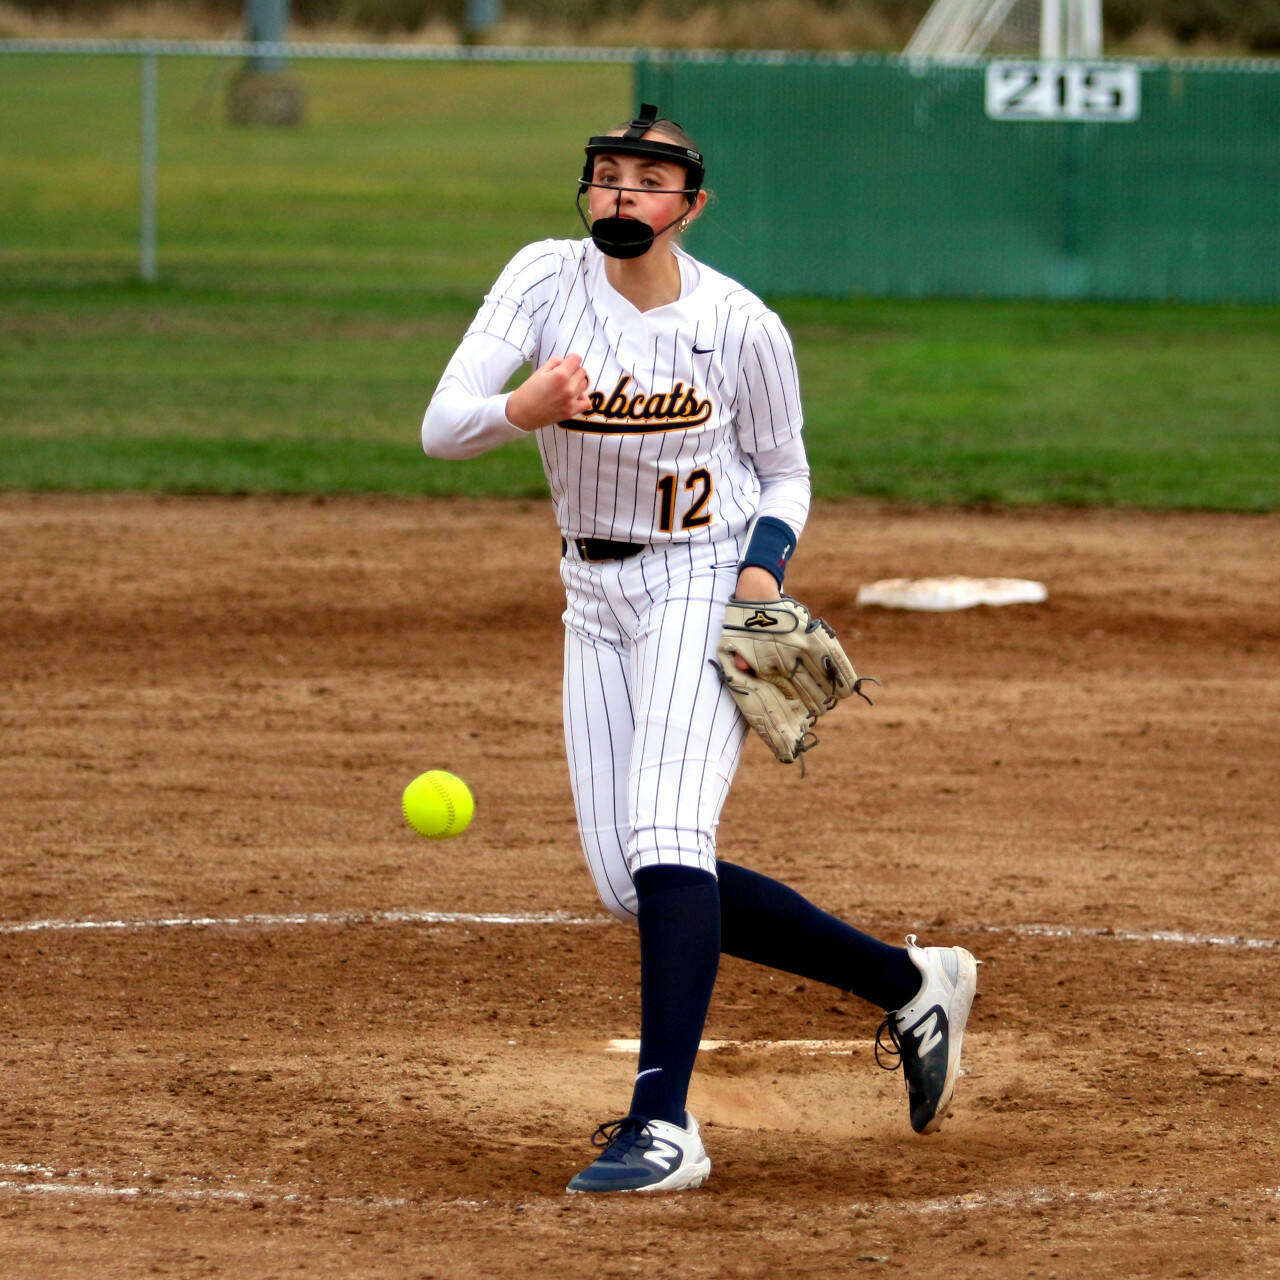 RYAN SPARKS | THE DAILY WORLD Aberdeen pitcher Lily Camp threw a one-hitter in a 10-0 mercy-rule victory over Black Hills in the Bobcats’ home-opening game on Wednesday in Aberdeen.